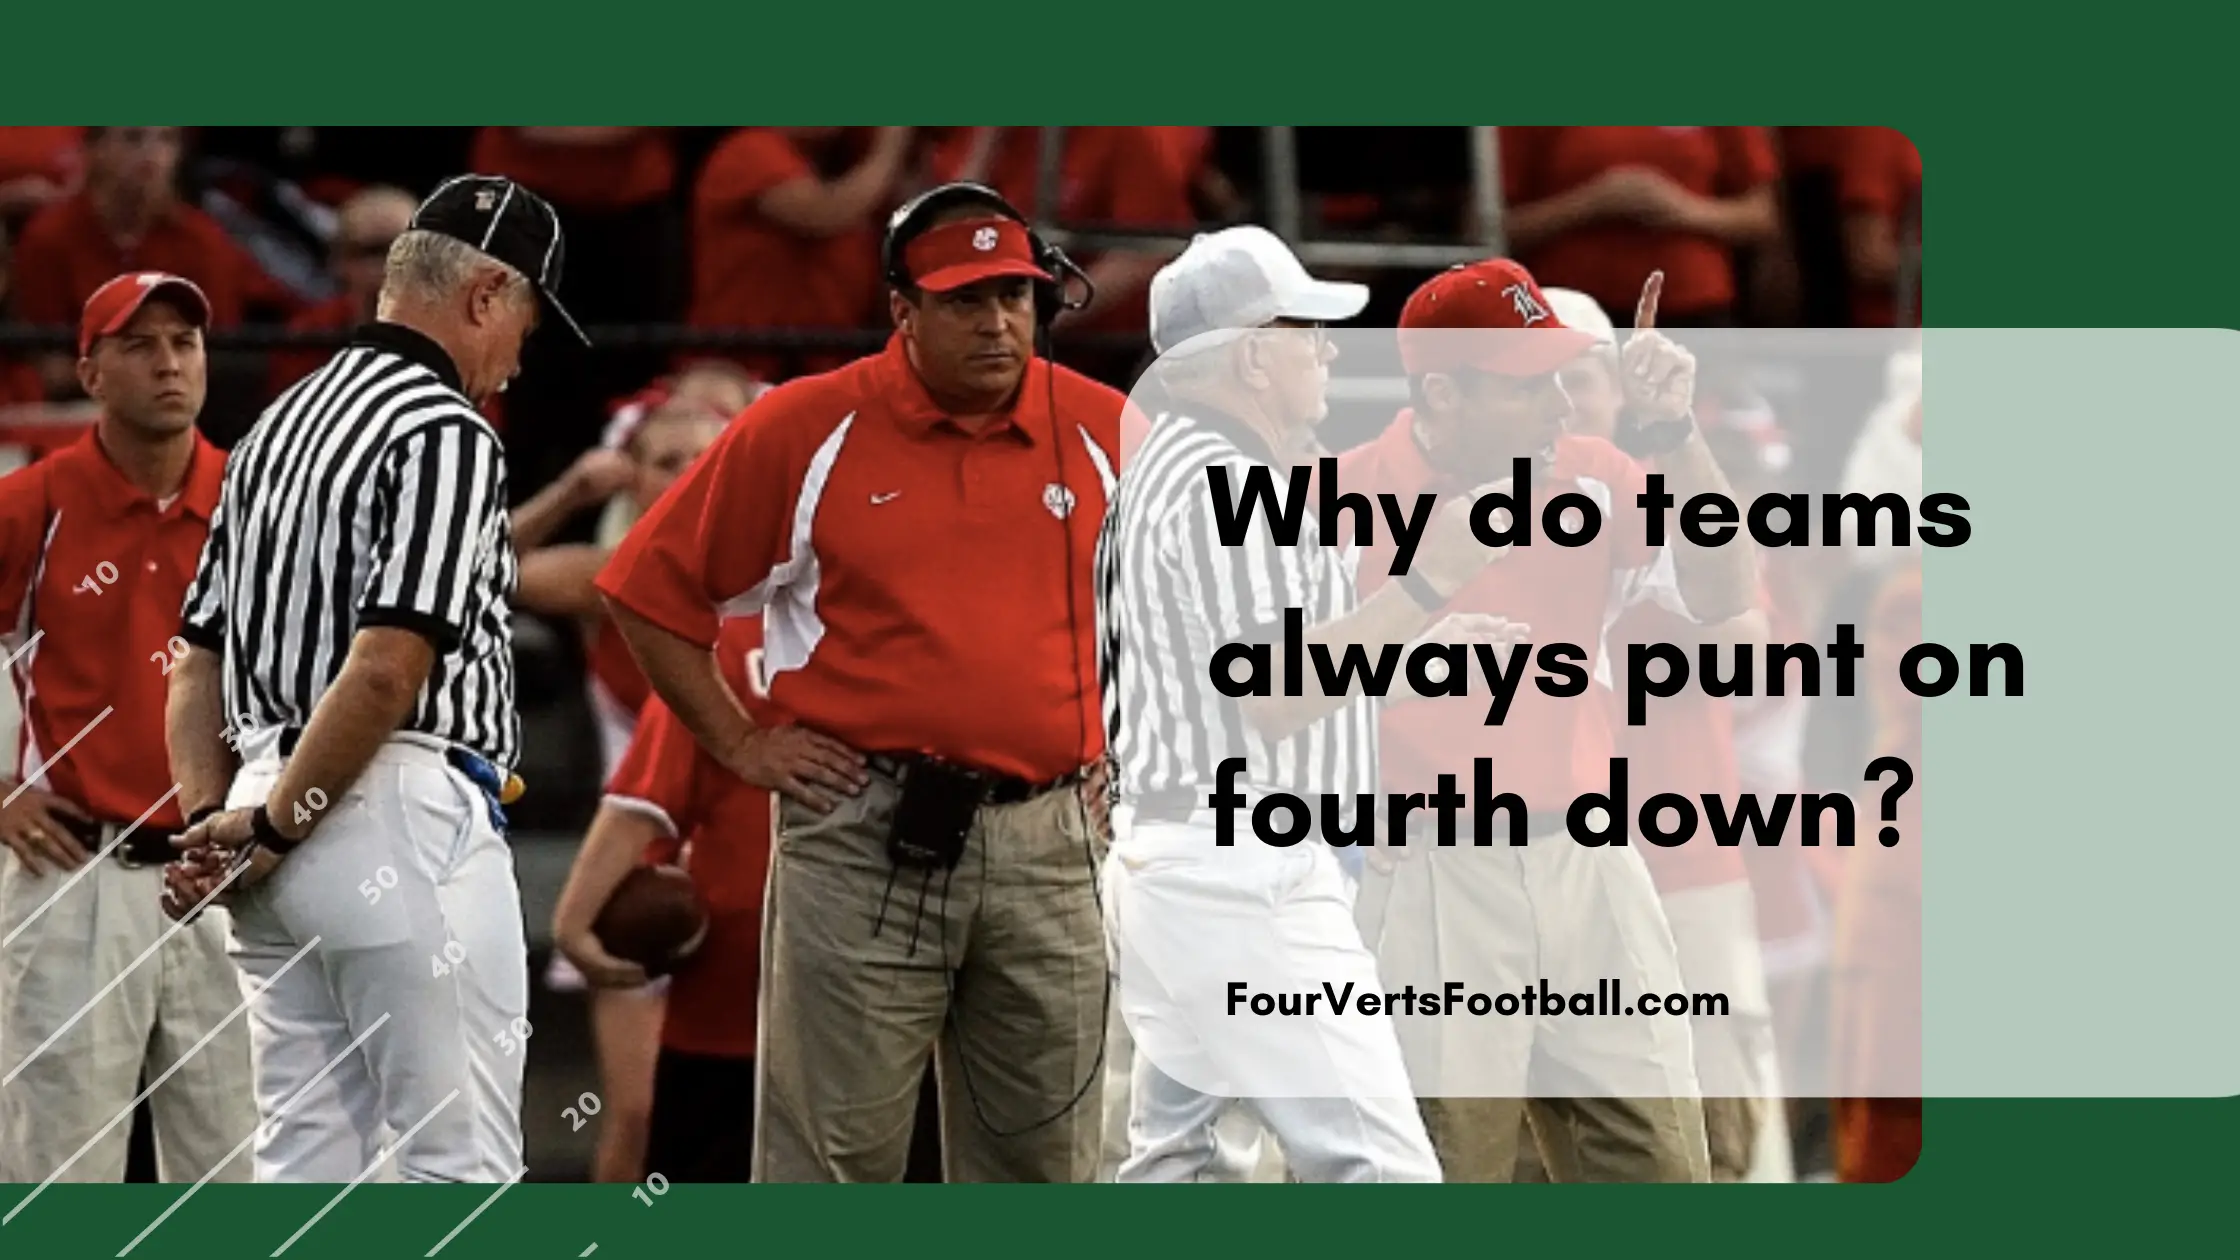 Why do teams always punt on fourth down?